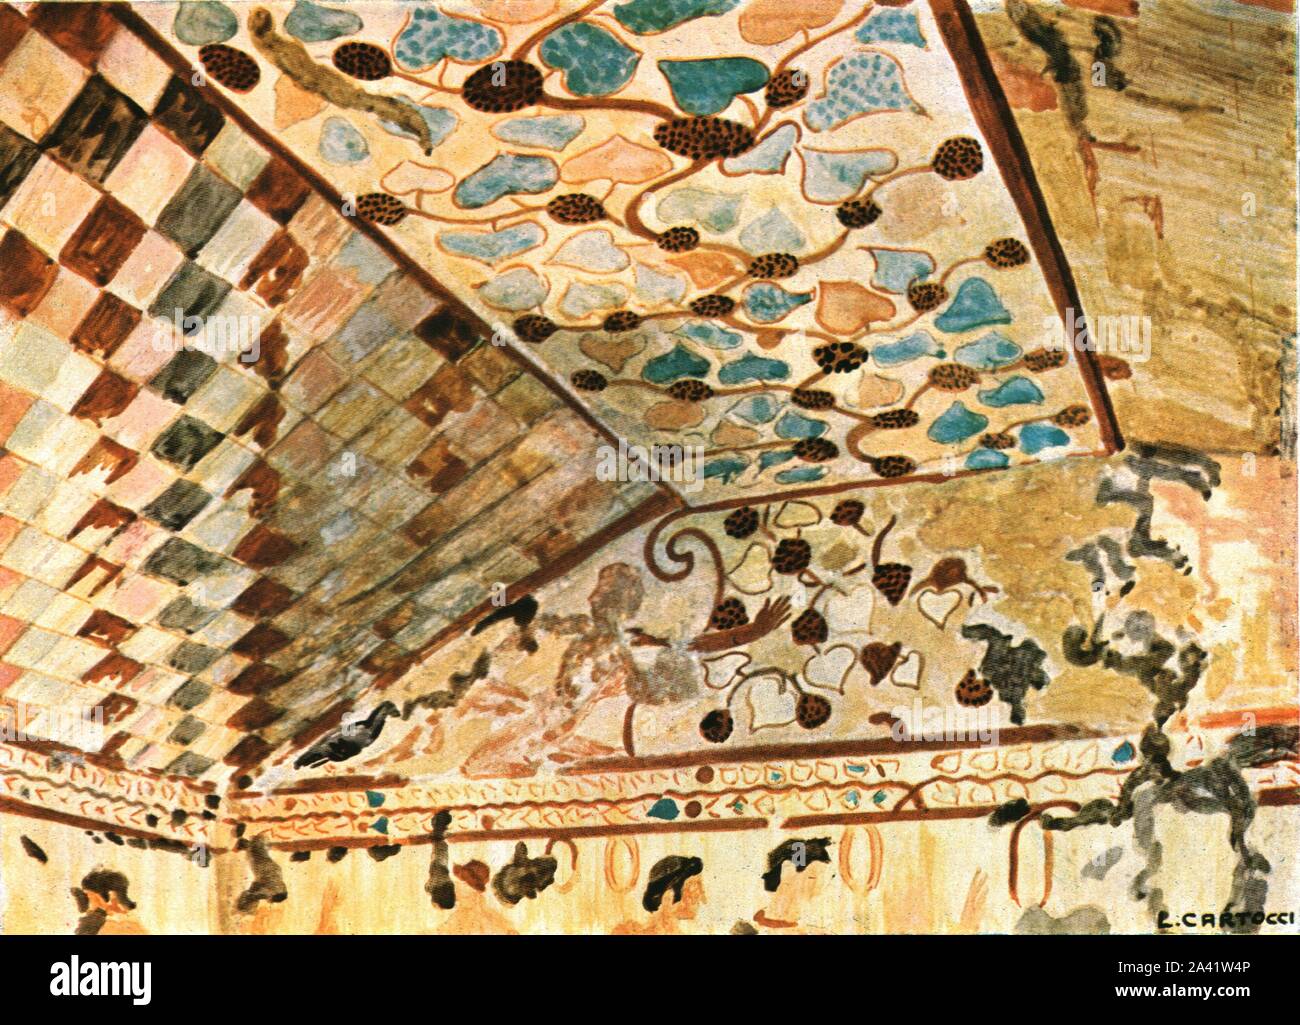 Mural painting in the Tomb with the Banquet (Tomba del Triclinio), Tarquinia, Italy, (1928). Etruscan burial chamber, 'About 500 B.C...Left corner'. After a water-colour by L. Cartocci. Plate XXIII, fig 60, from &quot;An Encyclopaedia of Colour Decoration from the Earliest Times to the Middle of the XIXth Century&quot; with explanatory text by Helmuth Bossert. [Ernst Wasmuth Ltd., Berlin, 1928] Stock Photo